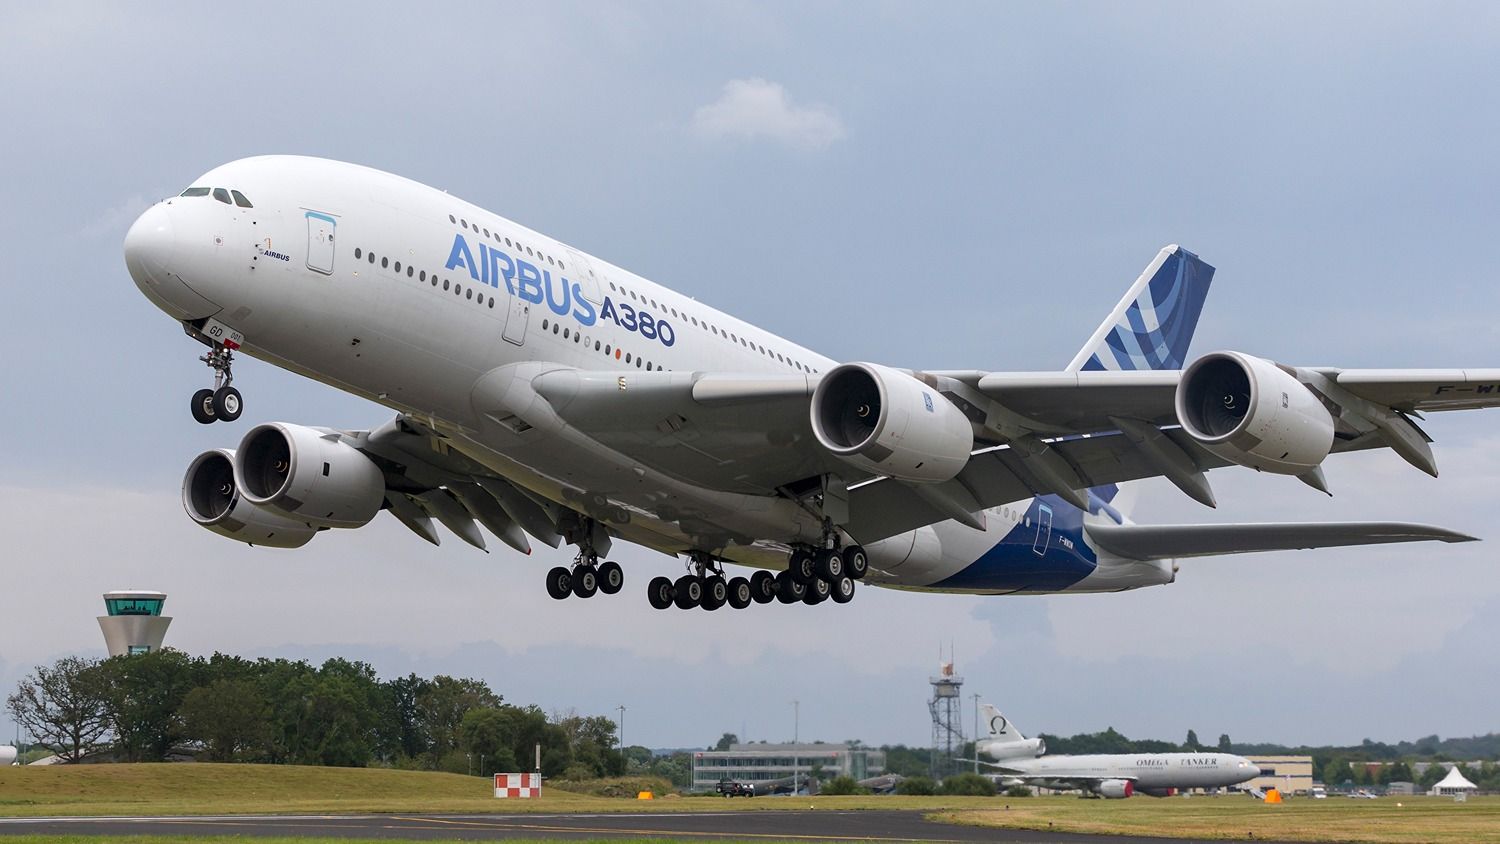 An Airbus A380 in house livery with Rolls-Royce Trent 900 engines taking off.